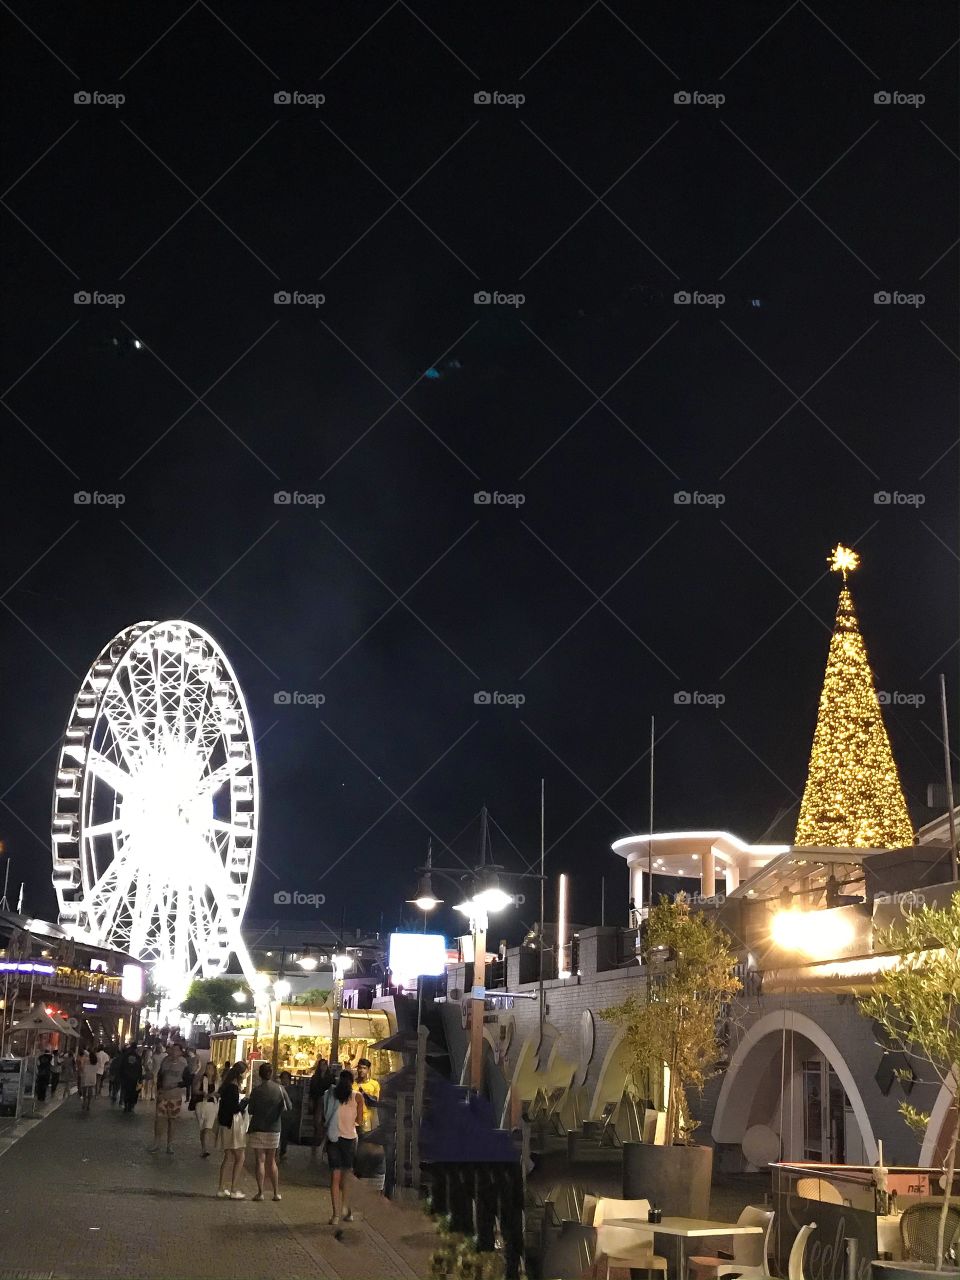 This ferris wheel was captured at the V & A in Cape Town over Christmas time and shows a few ellipsis 